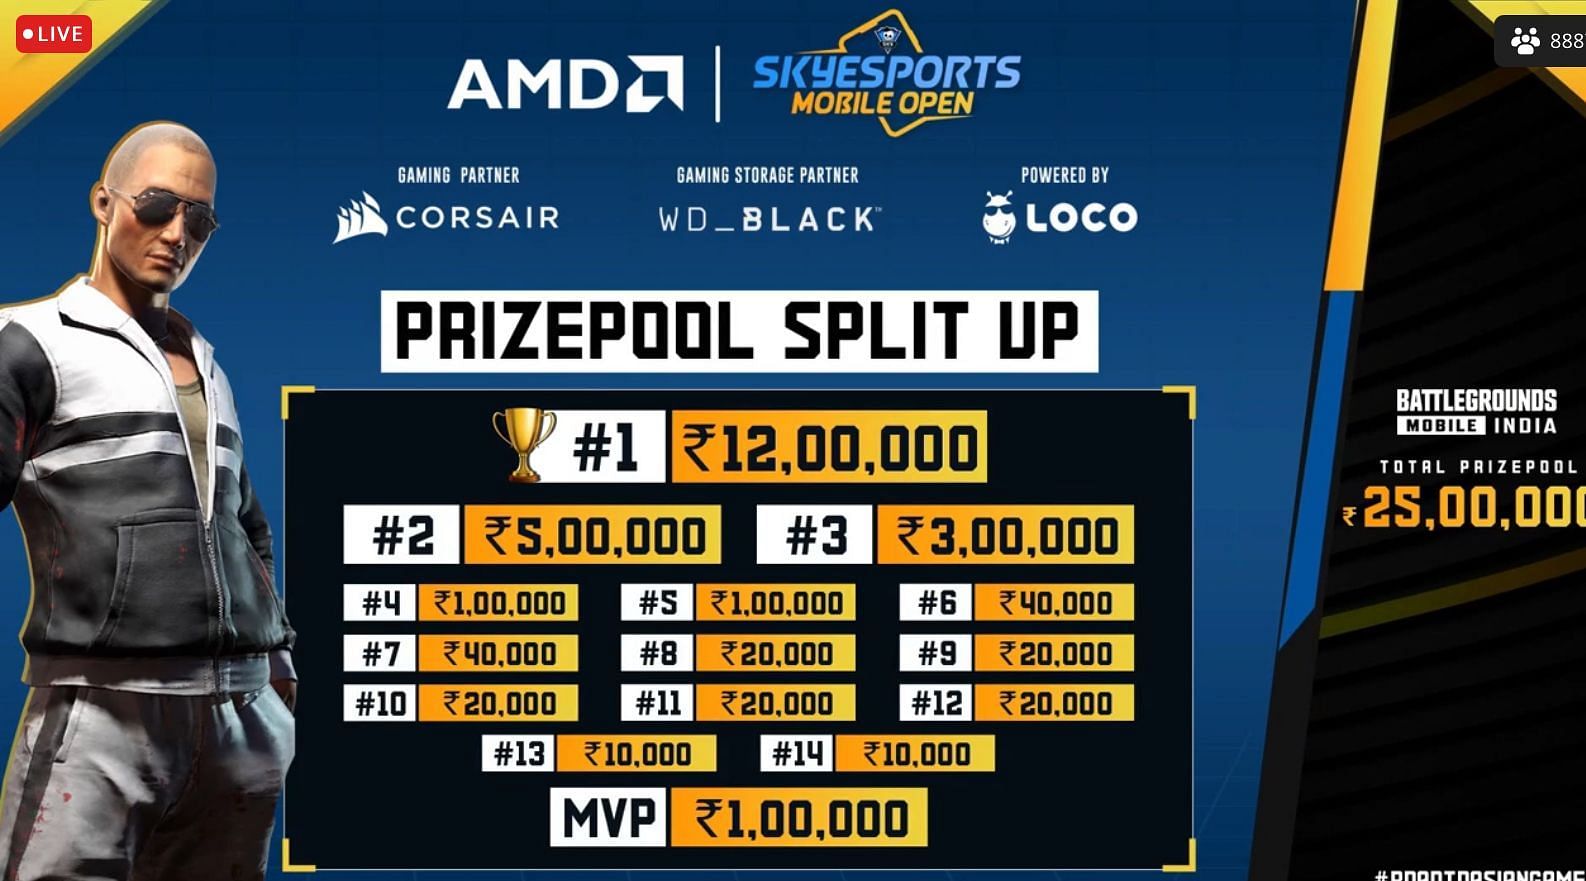 Prize pool break up of the Skyesports Mobile Open BGMI (Image via Skyesports)